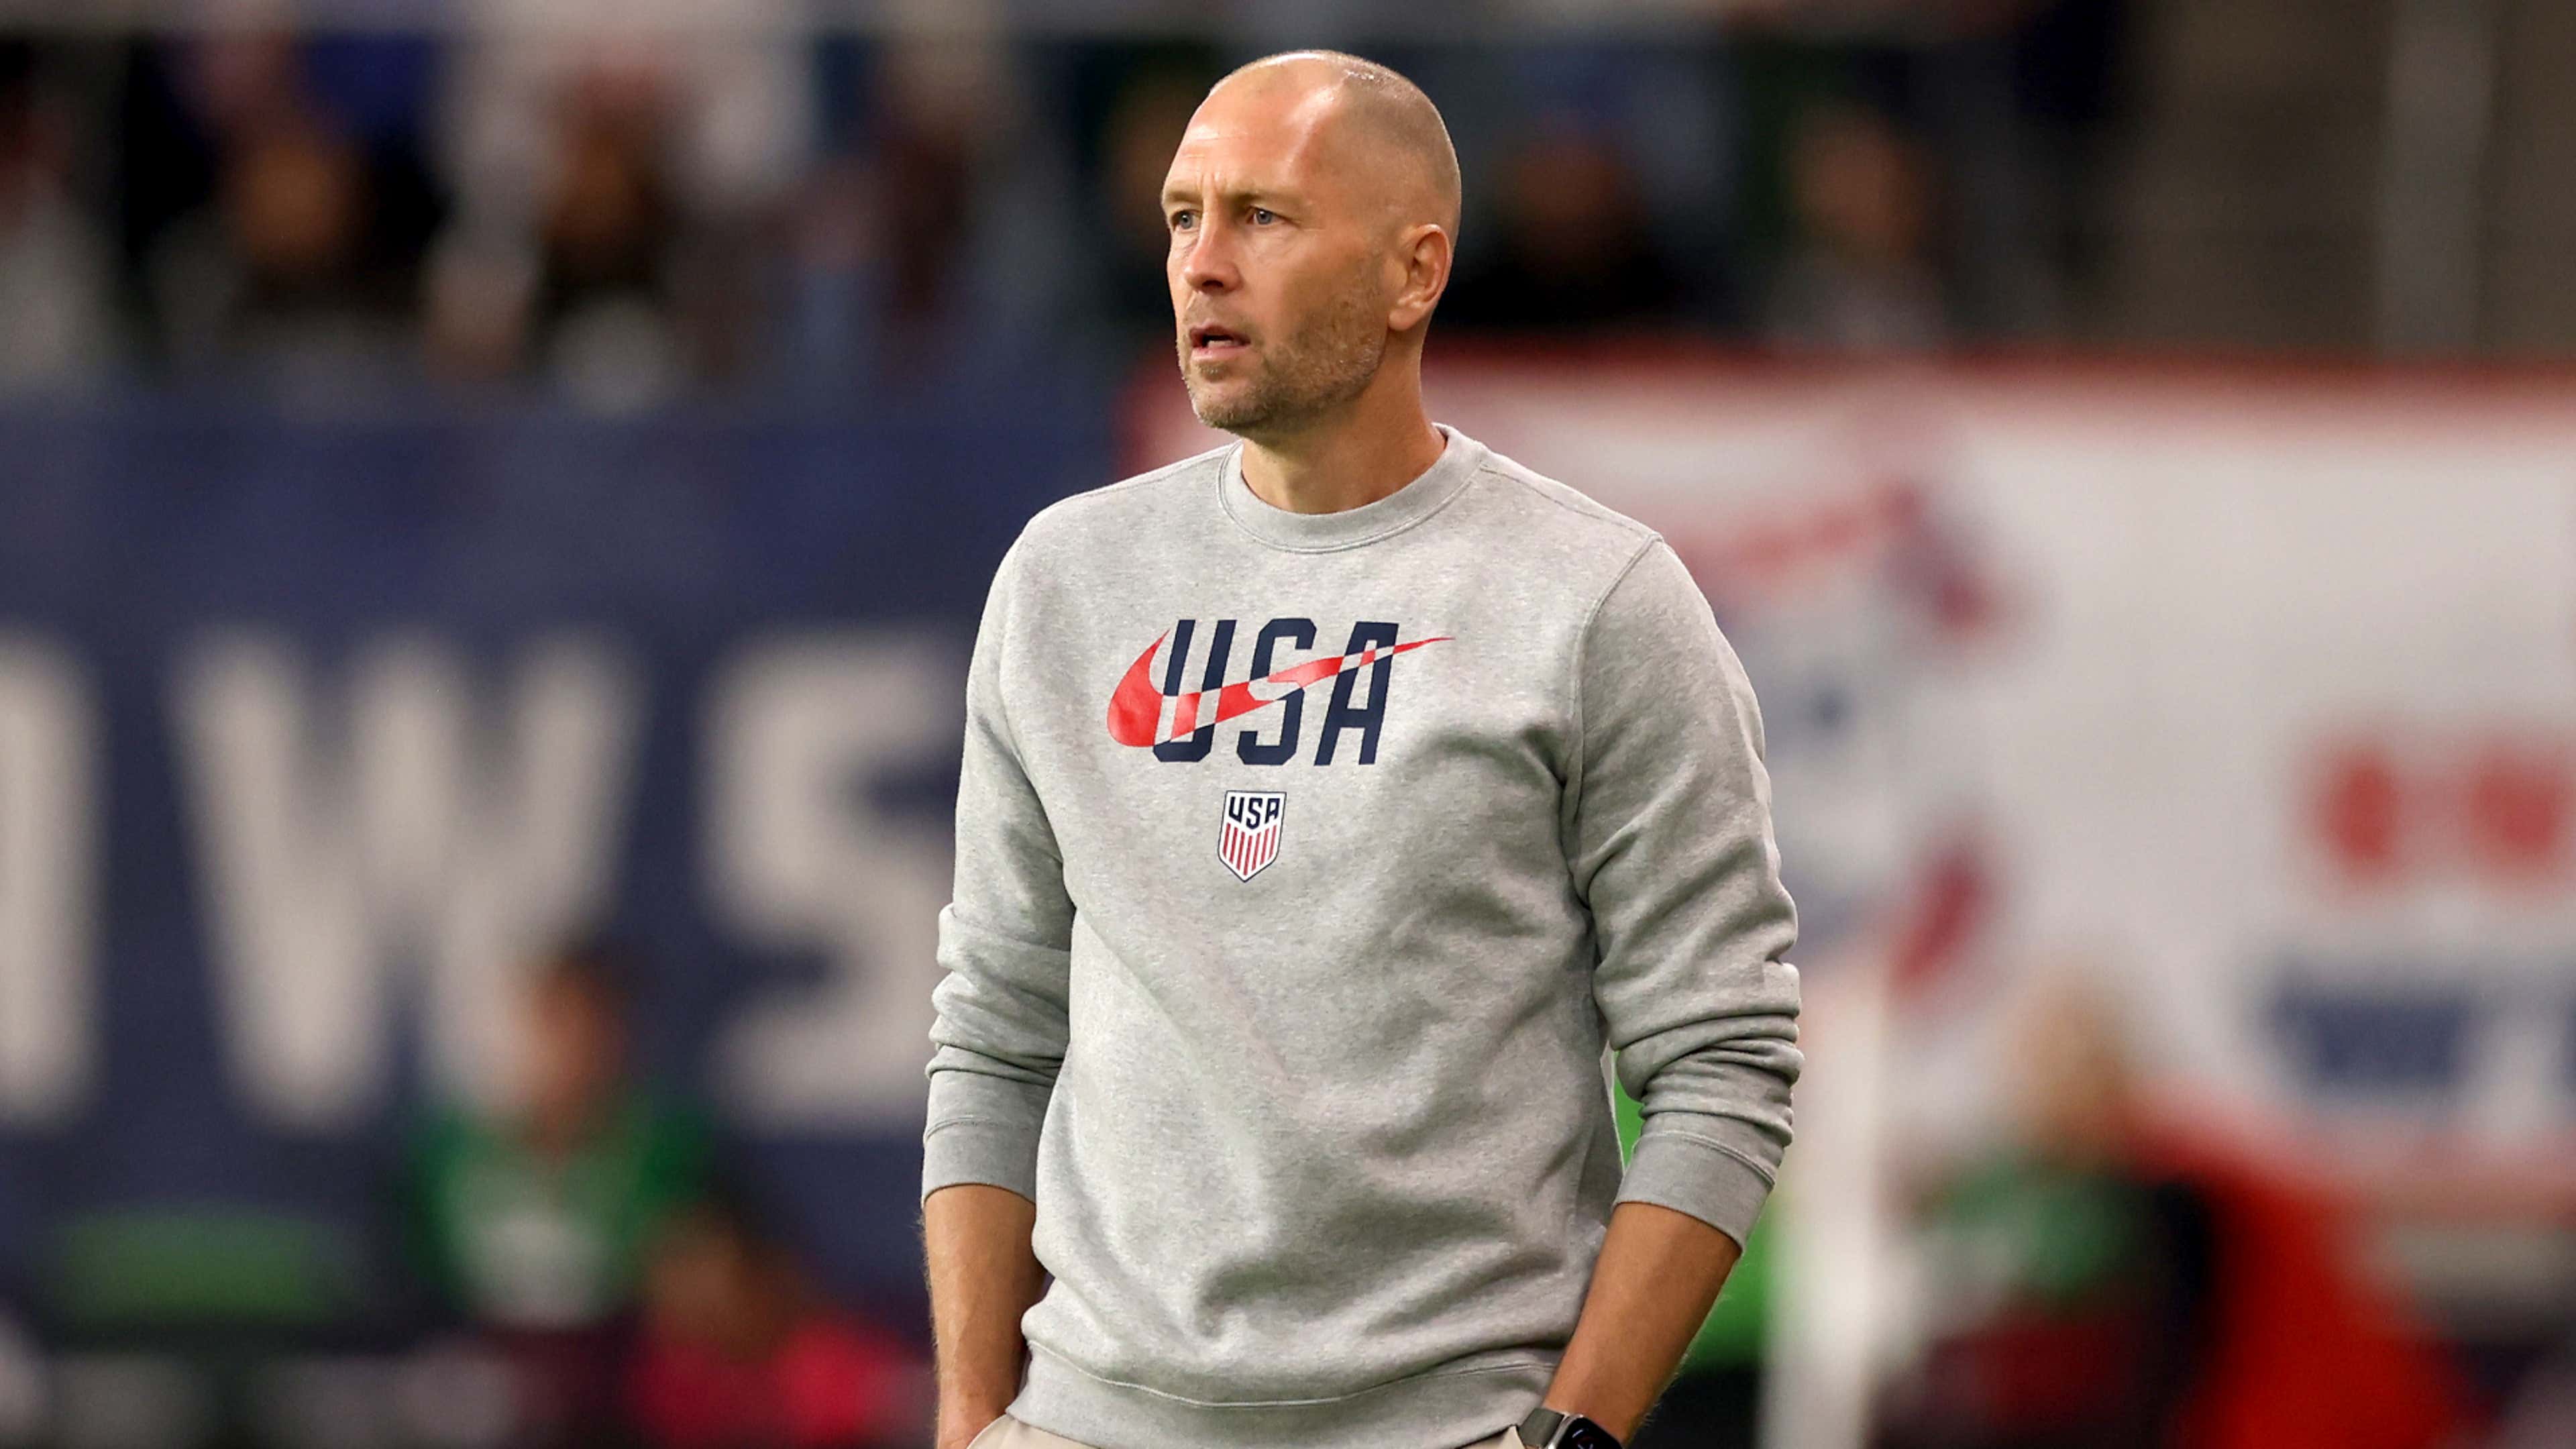 Gregg Berhalter believes the USMNT can win the World Cup.